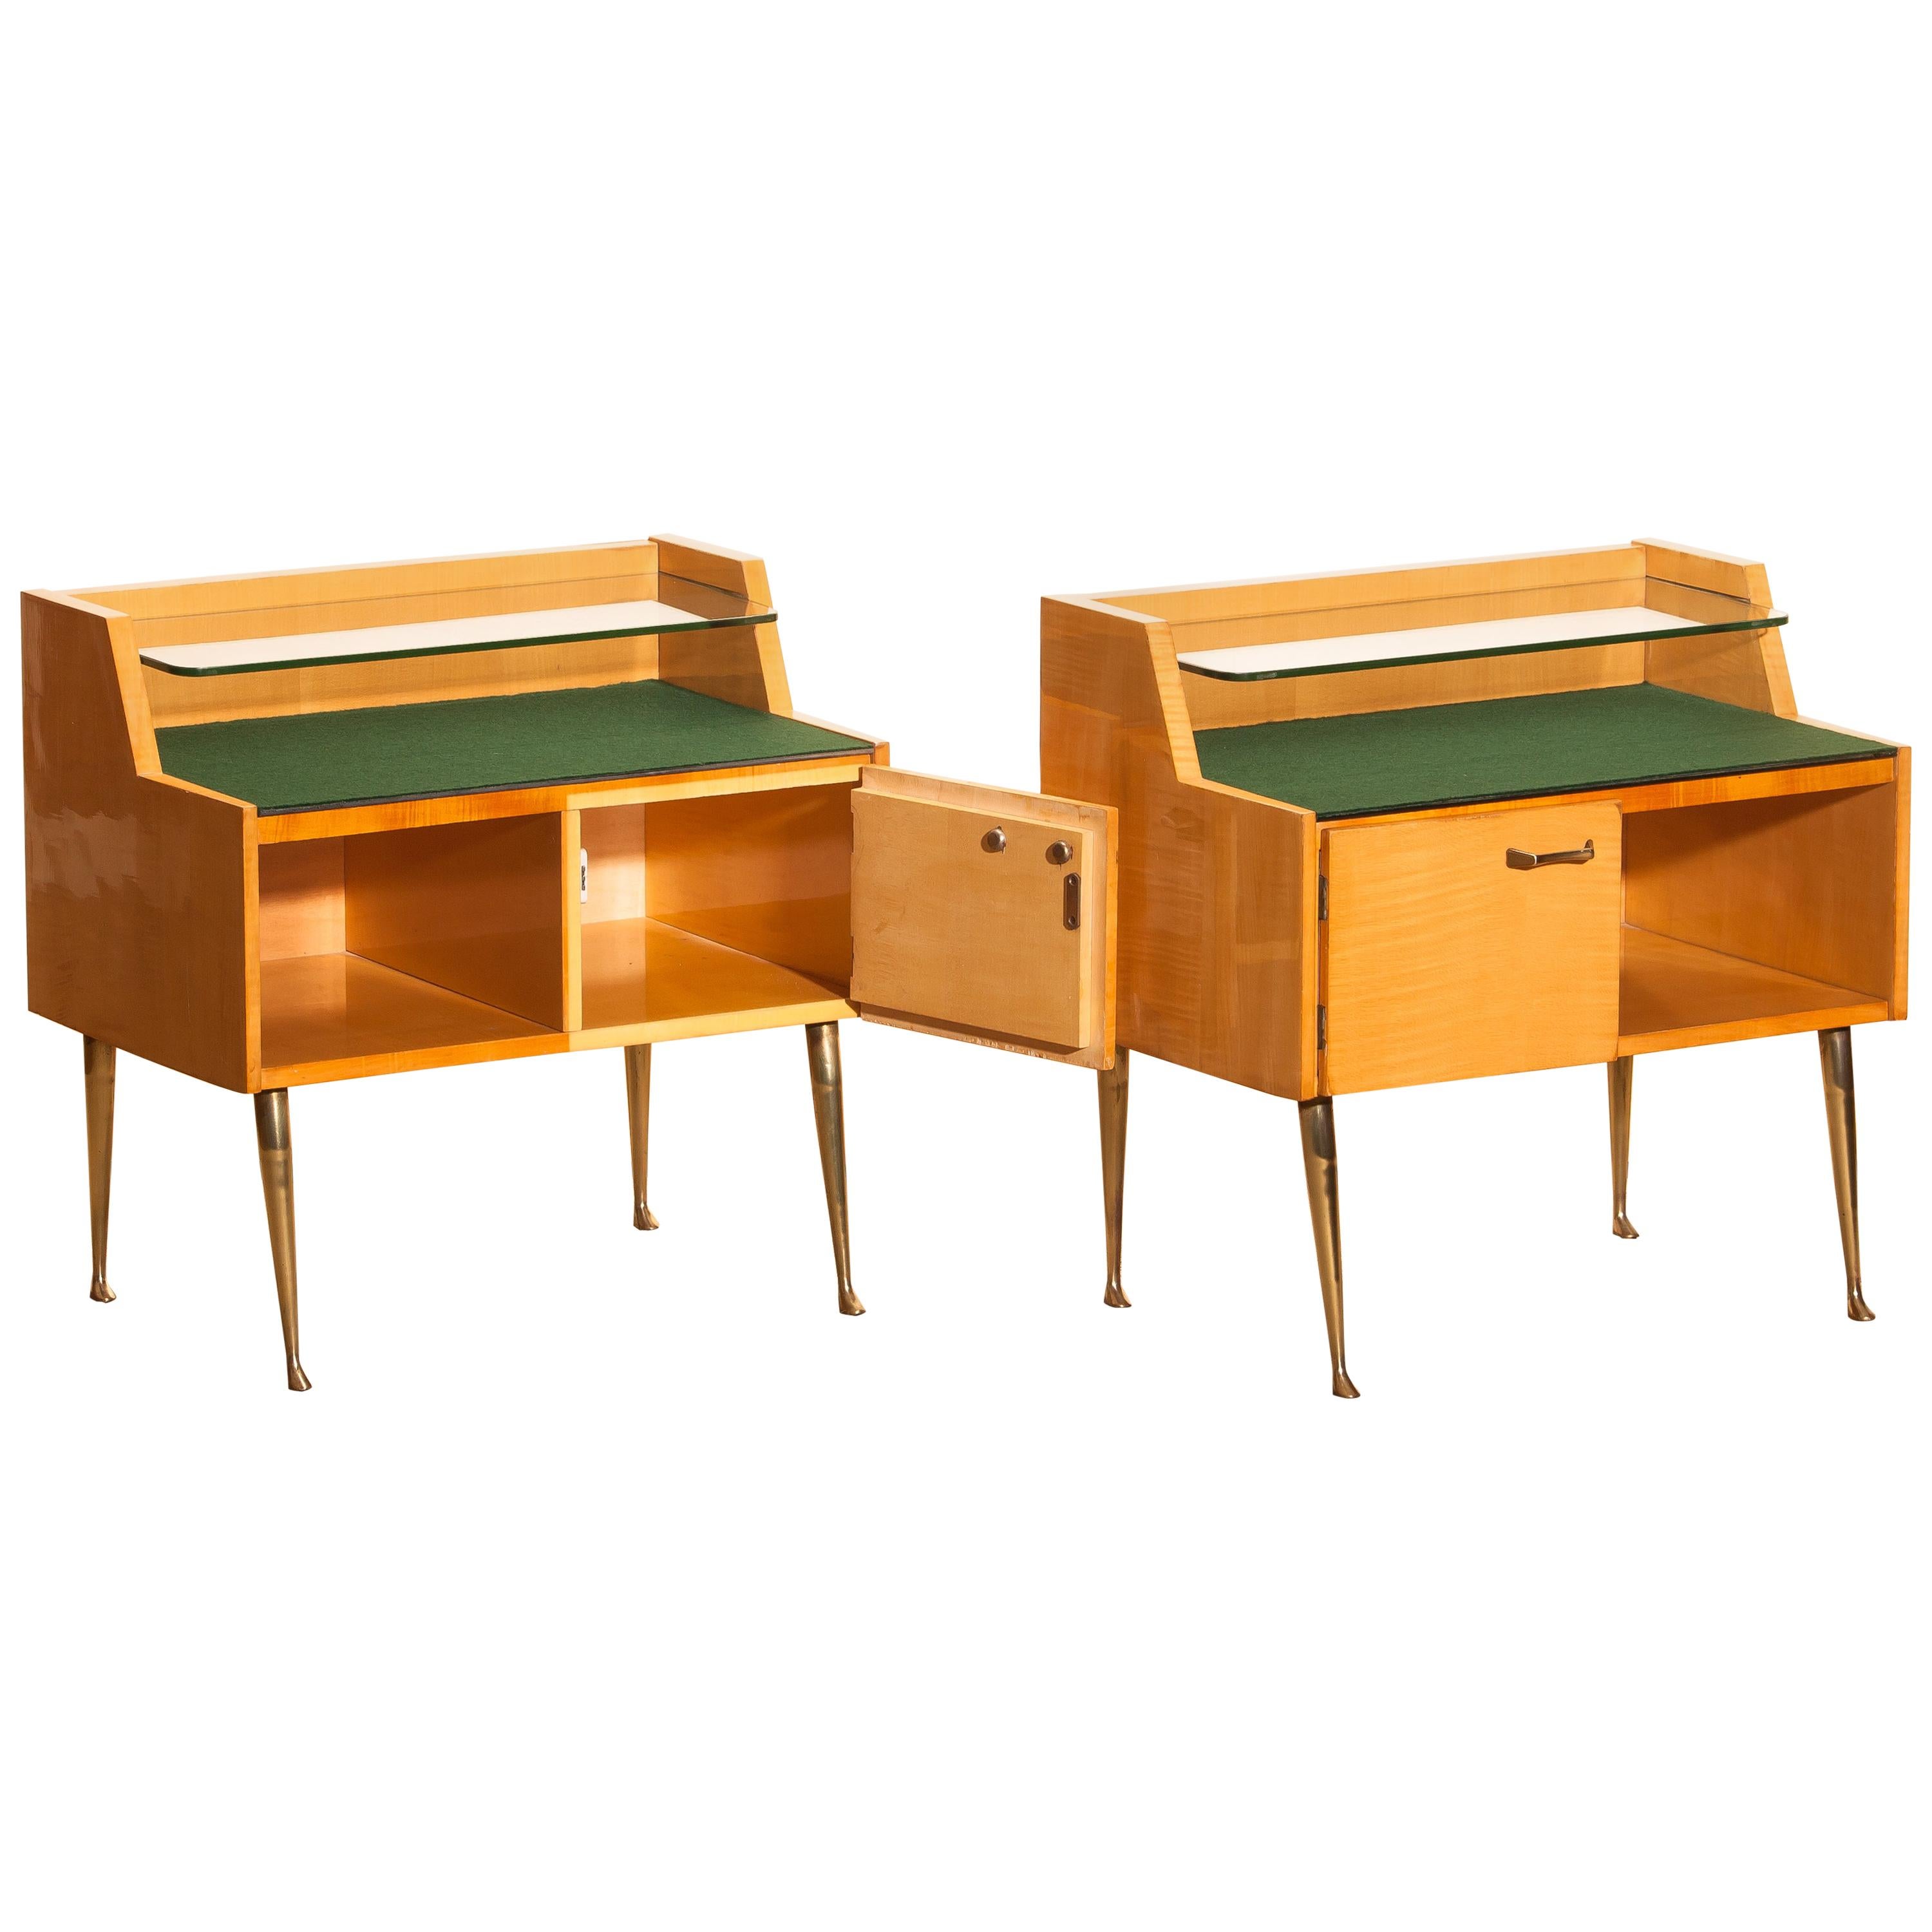 Beautiful set of two Italian midcentury bedside tables in maple with brass legs and brass handle designed by Paolo Buffa, Italy, 1950s.
Both are in good condition.
The top is covered with green felt and in addition, there's a smaller glass shelf